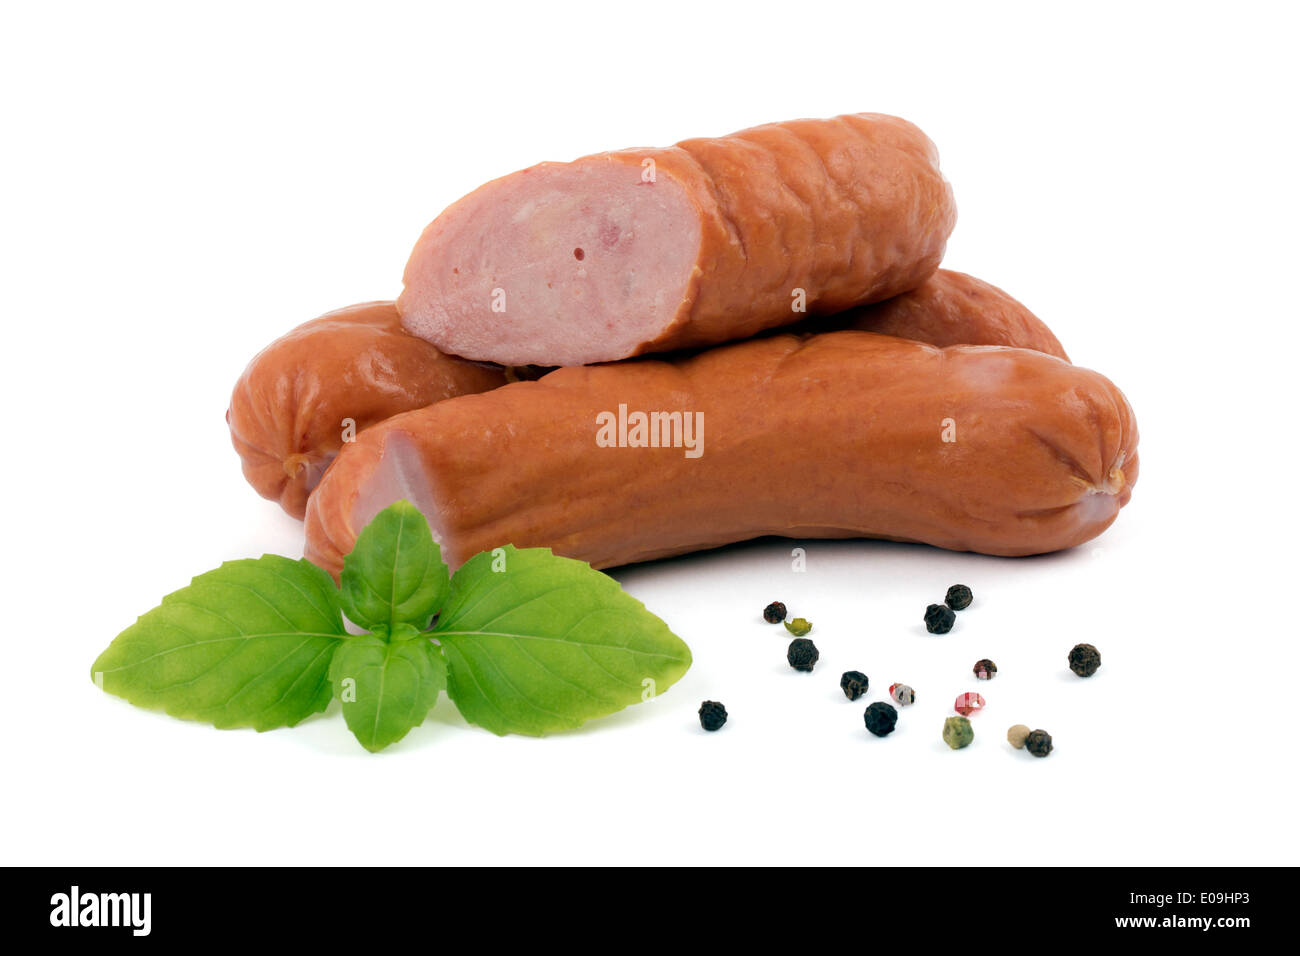 Sausage on a white background Banque D'Images